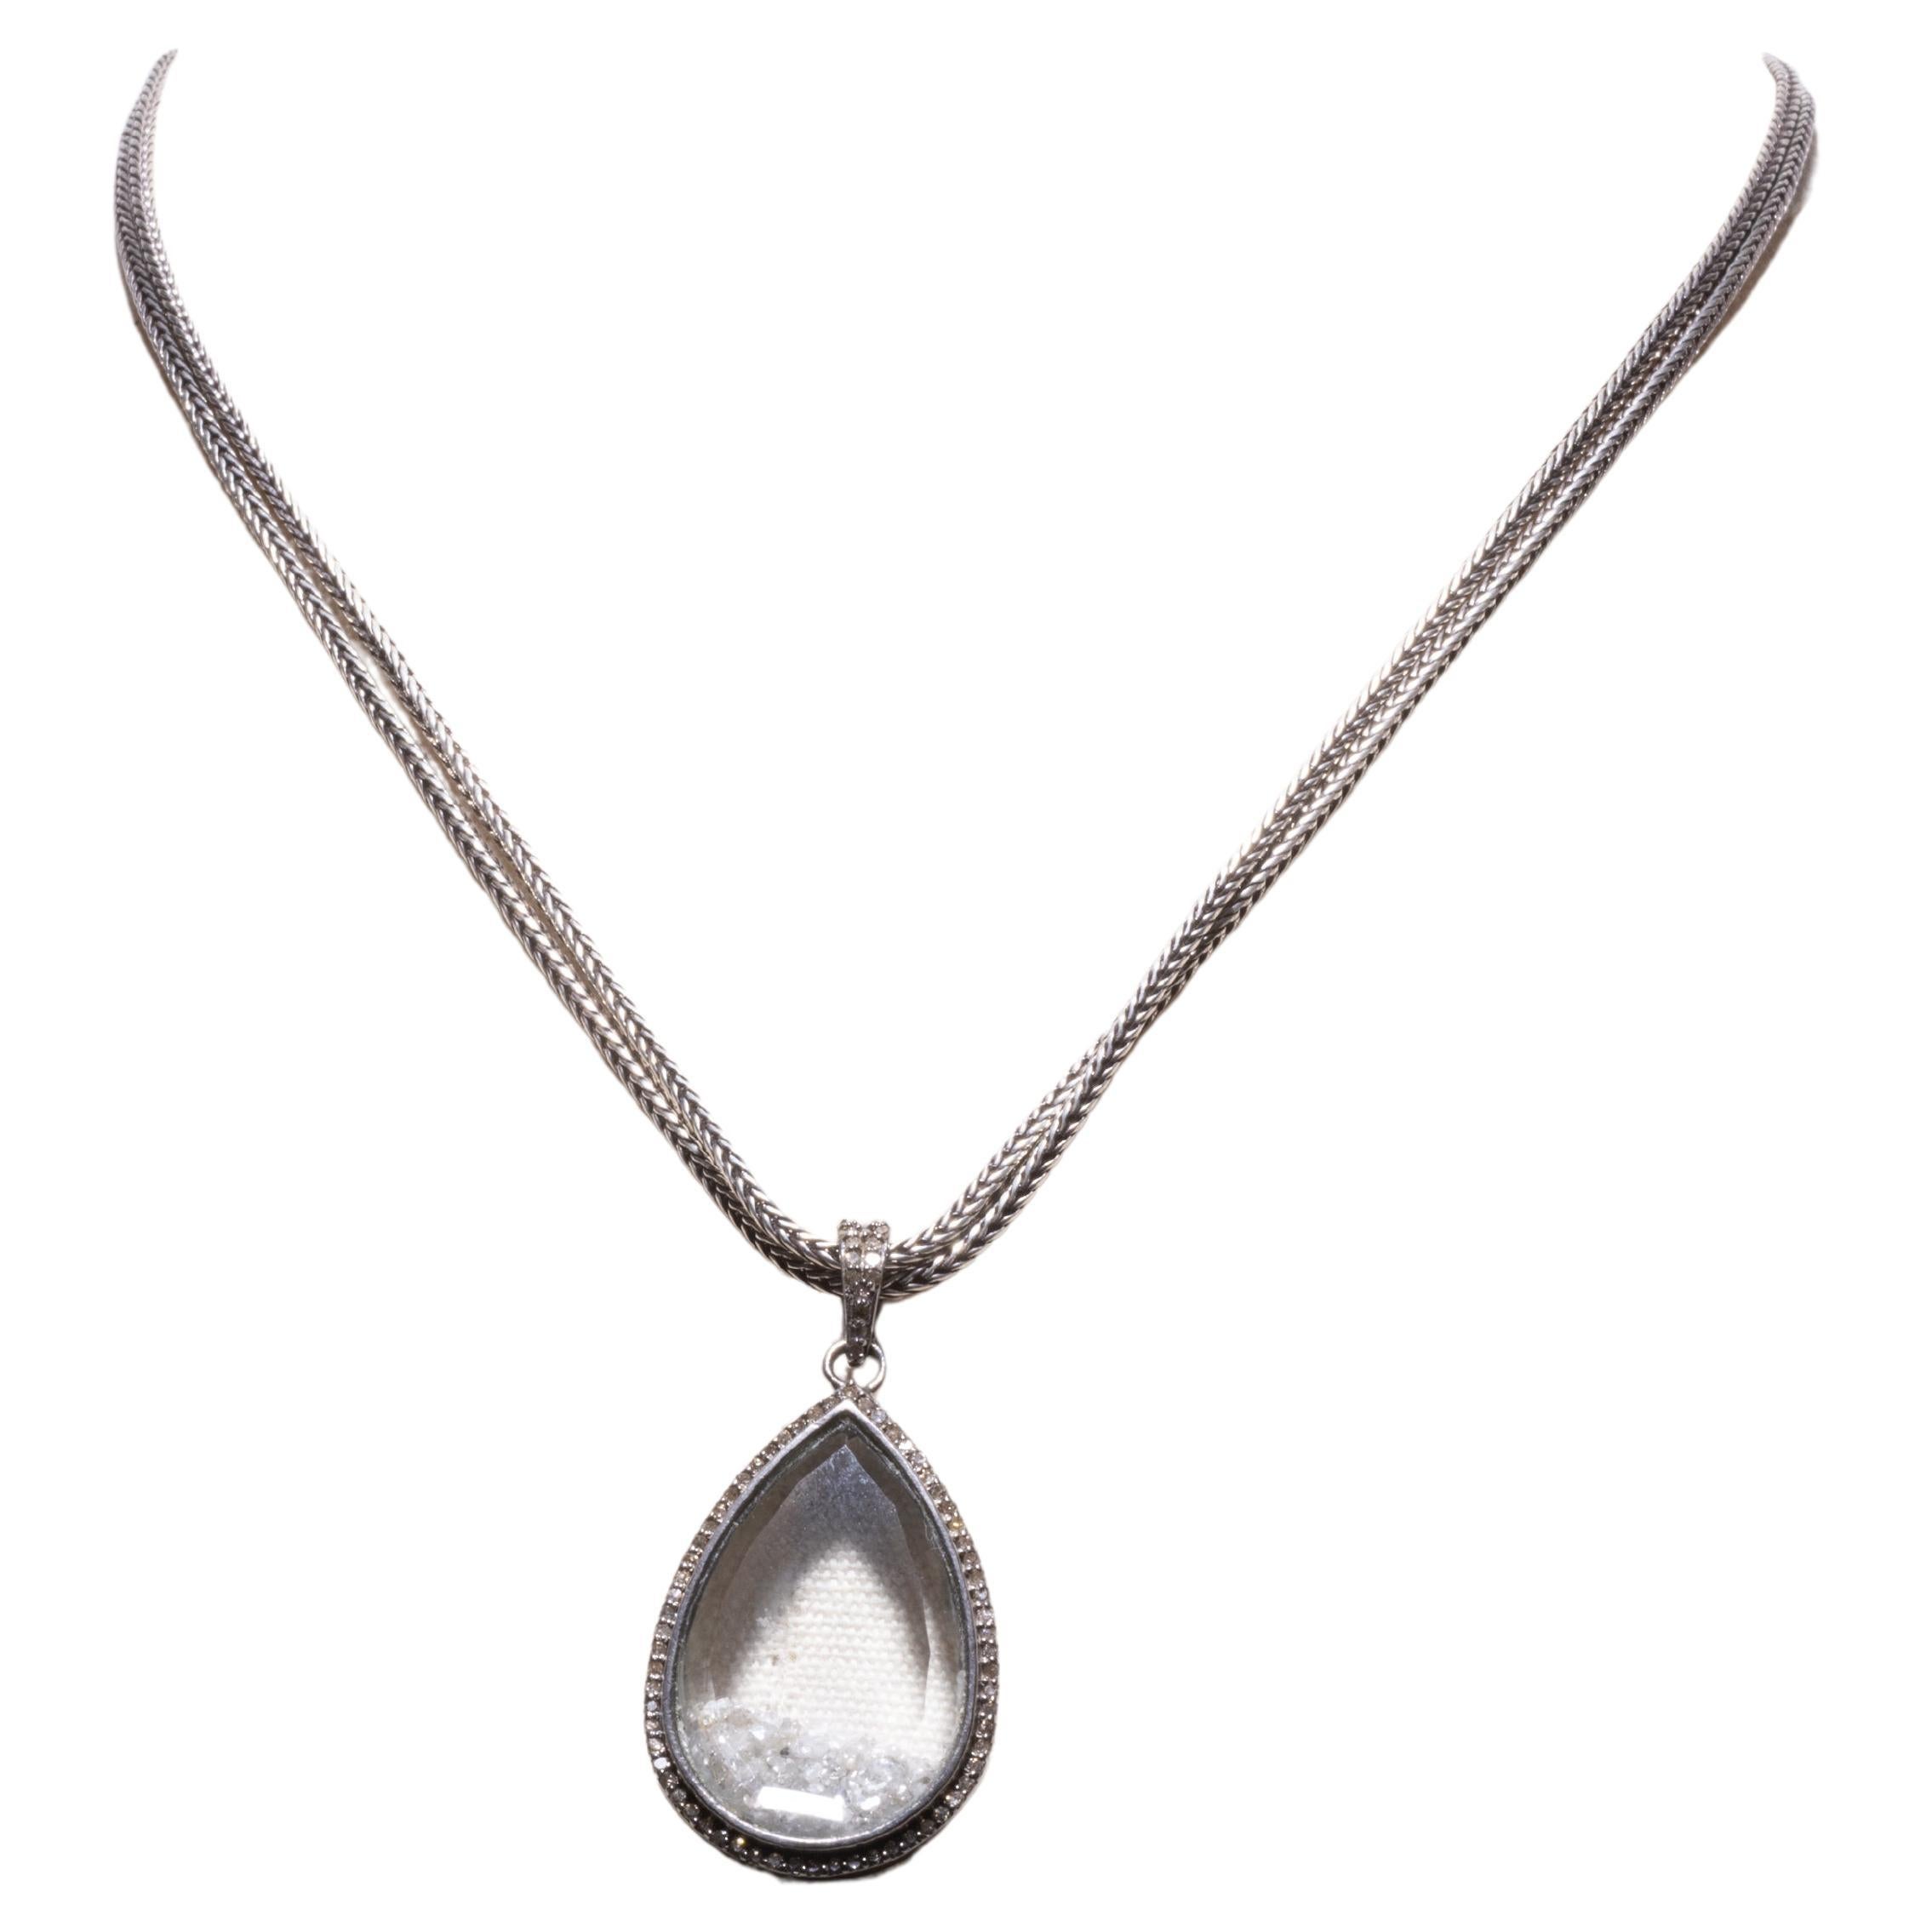 A cool and unusual beveled glass picture frame pear-shaped pendant with loose, faceted round diamonds inside and also along the border and the bail.  The chain is a hand-rolled sterling silver chain.  You can wear this short by doubling the chain